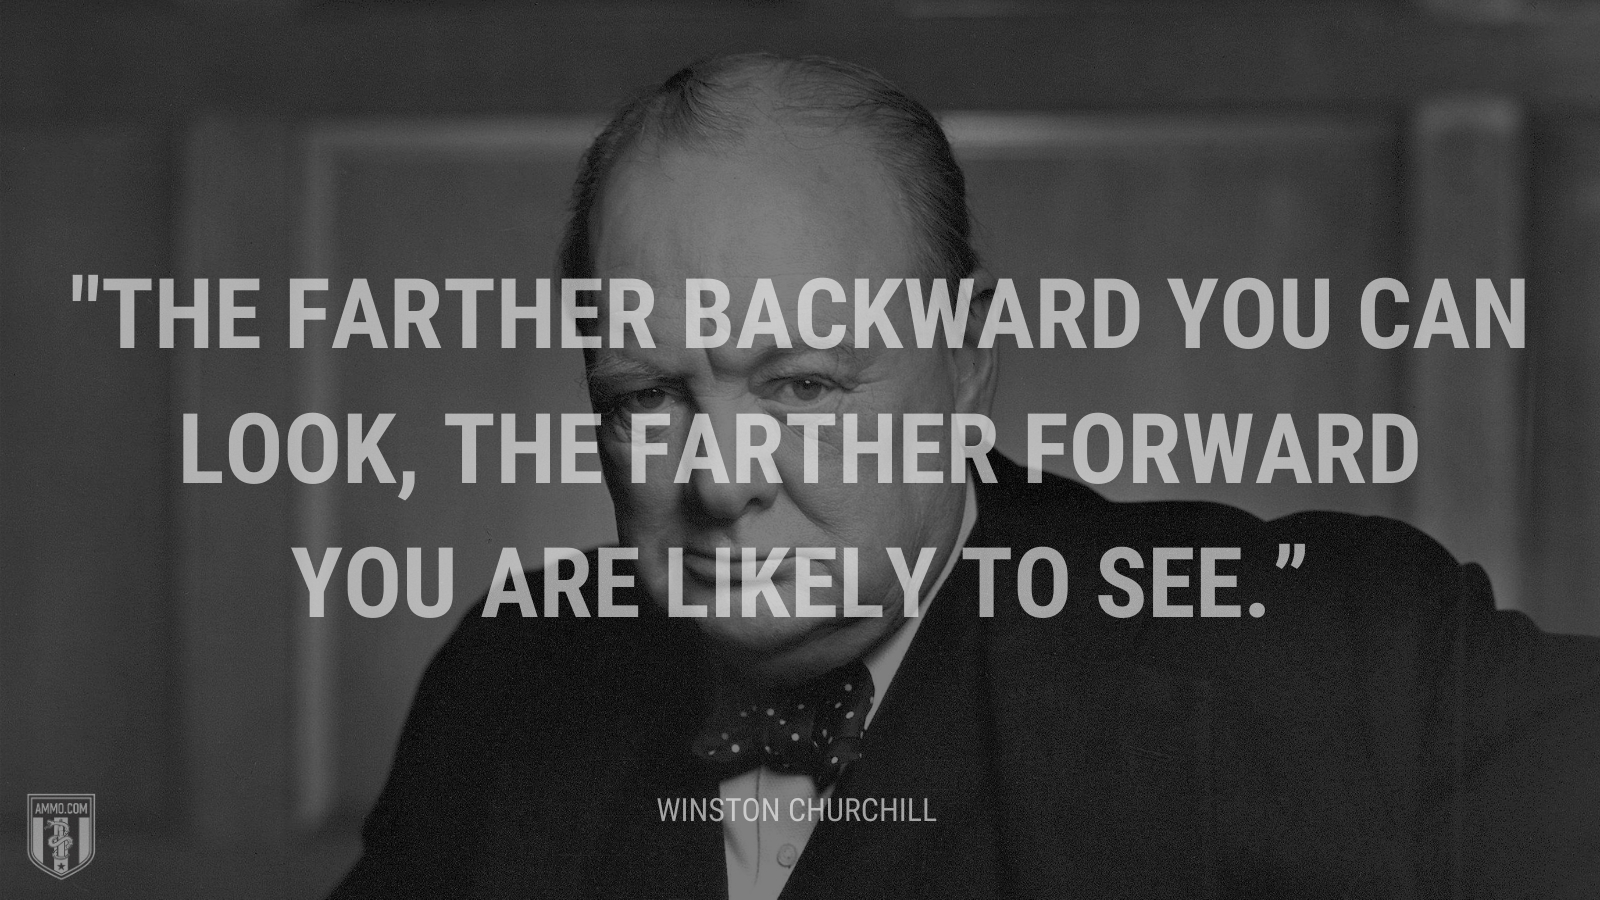 “The farther backward you can look, the farther forward you are likely to see.” - Winston Churchill